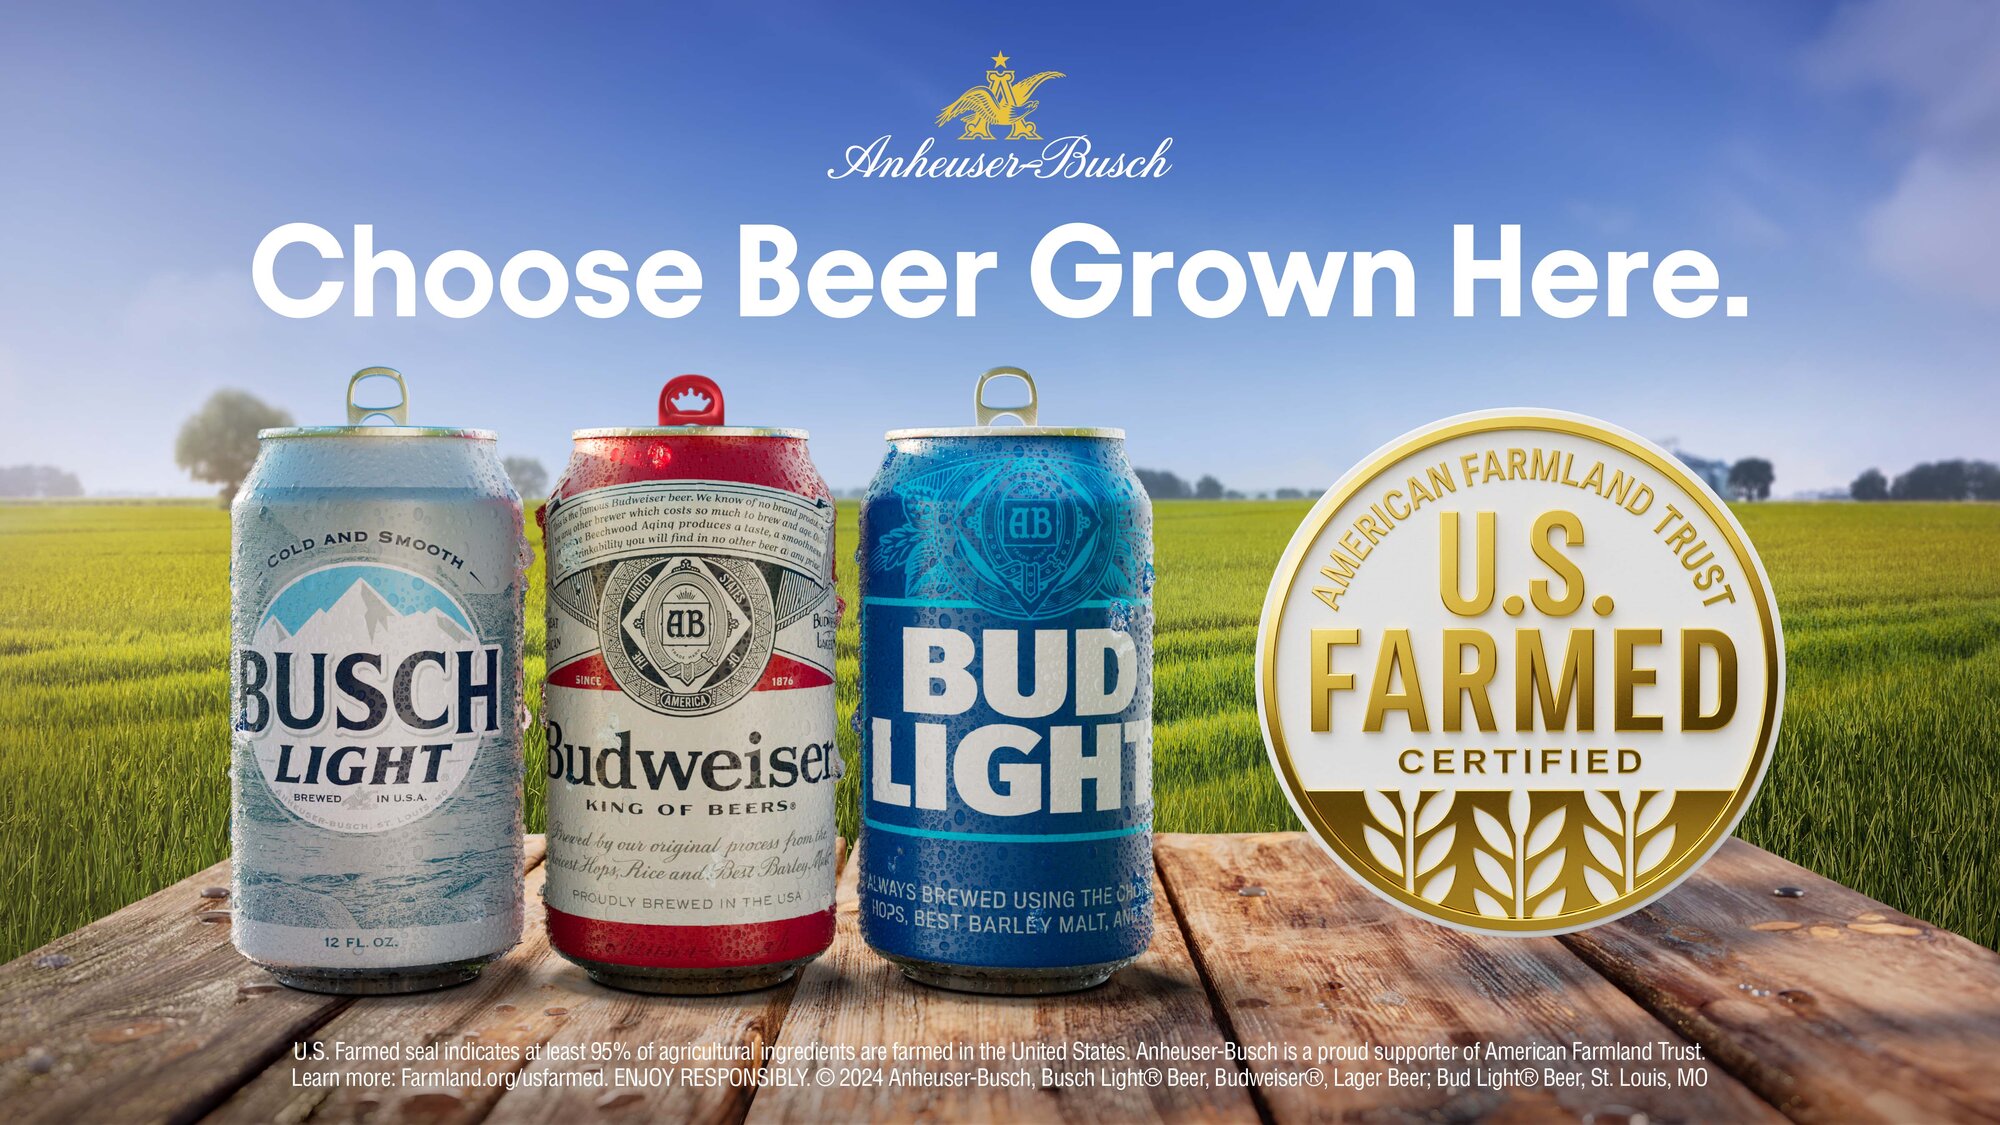 Choose Beer Grown Here: Anheuser-Busch is First to Adopt American Farmland Trust’s U.S. Farmed Certification, Helping Shoppers Choose Products Made with U.S. Ingredients